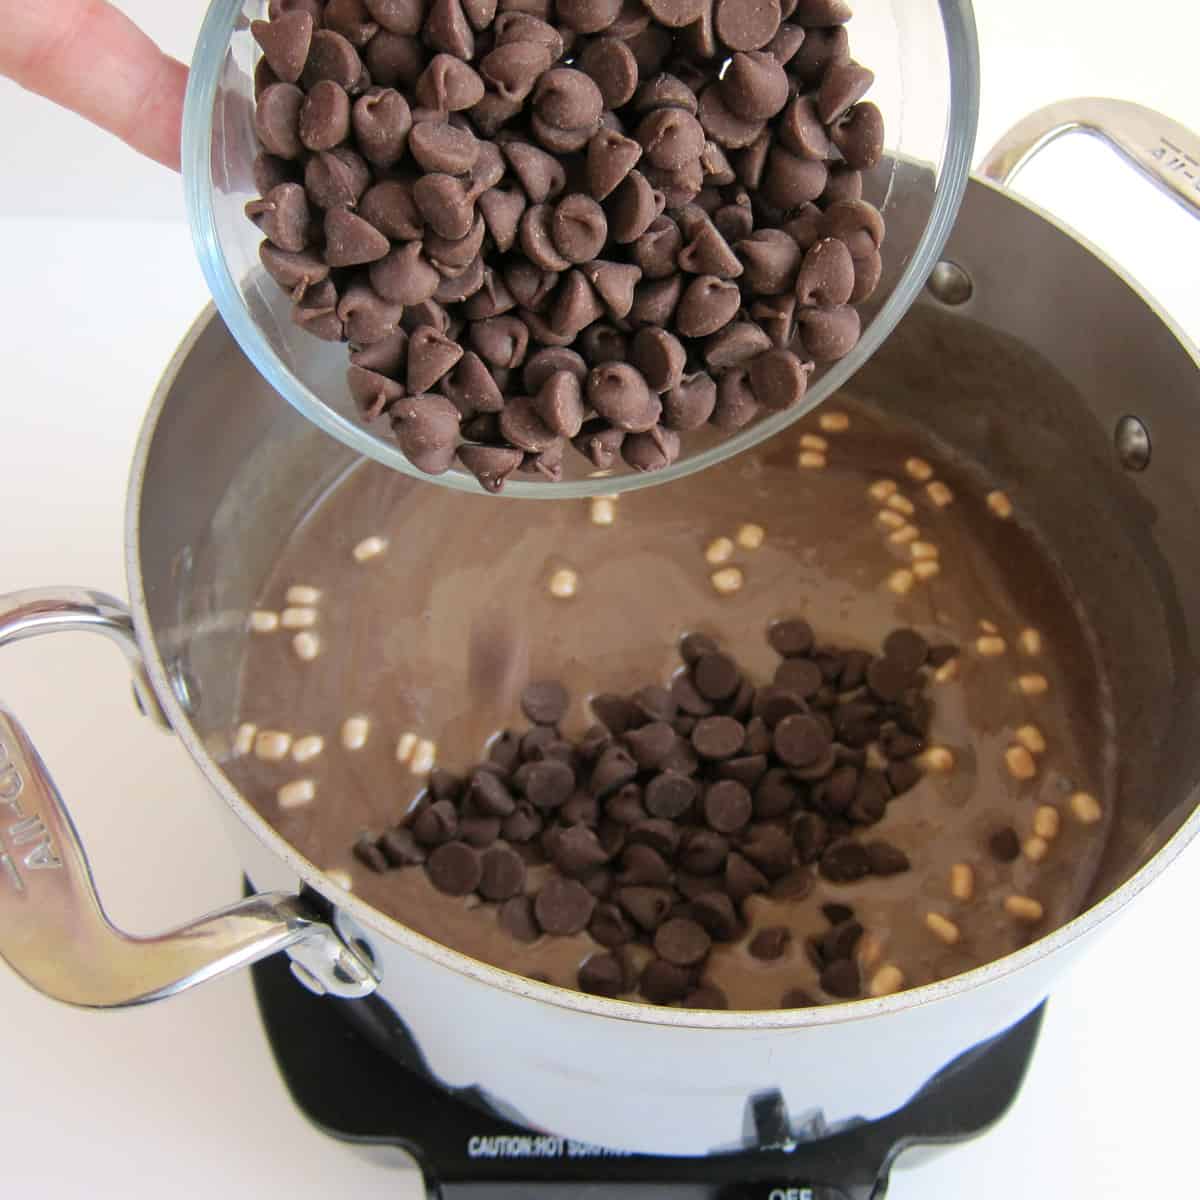 pouring milk chocolate chips into the hot chocolate and sweetened condensed milk blend.